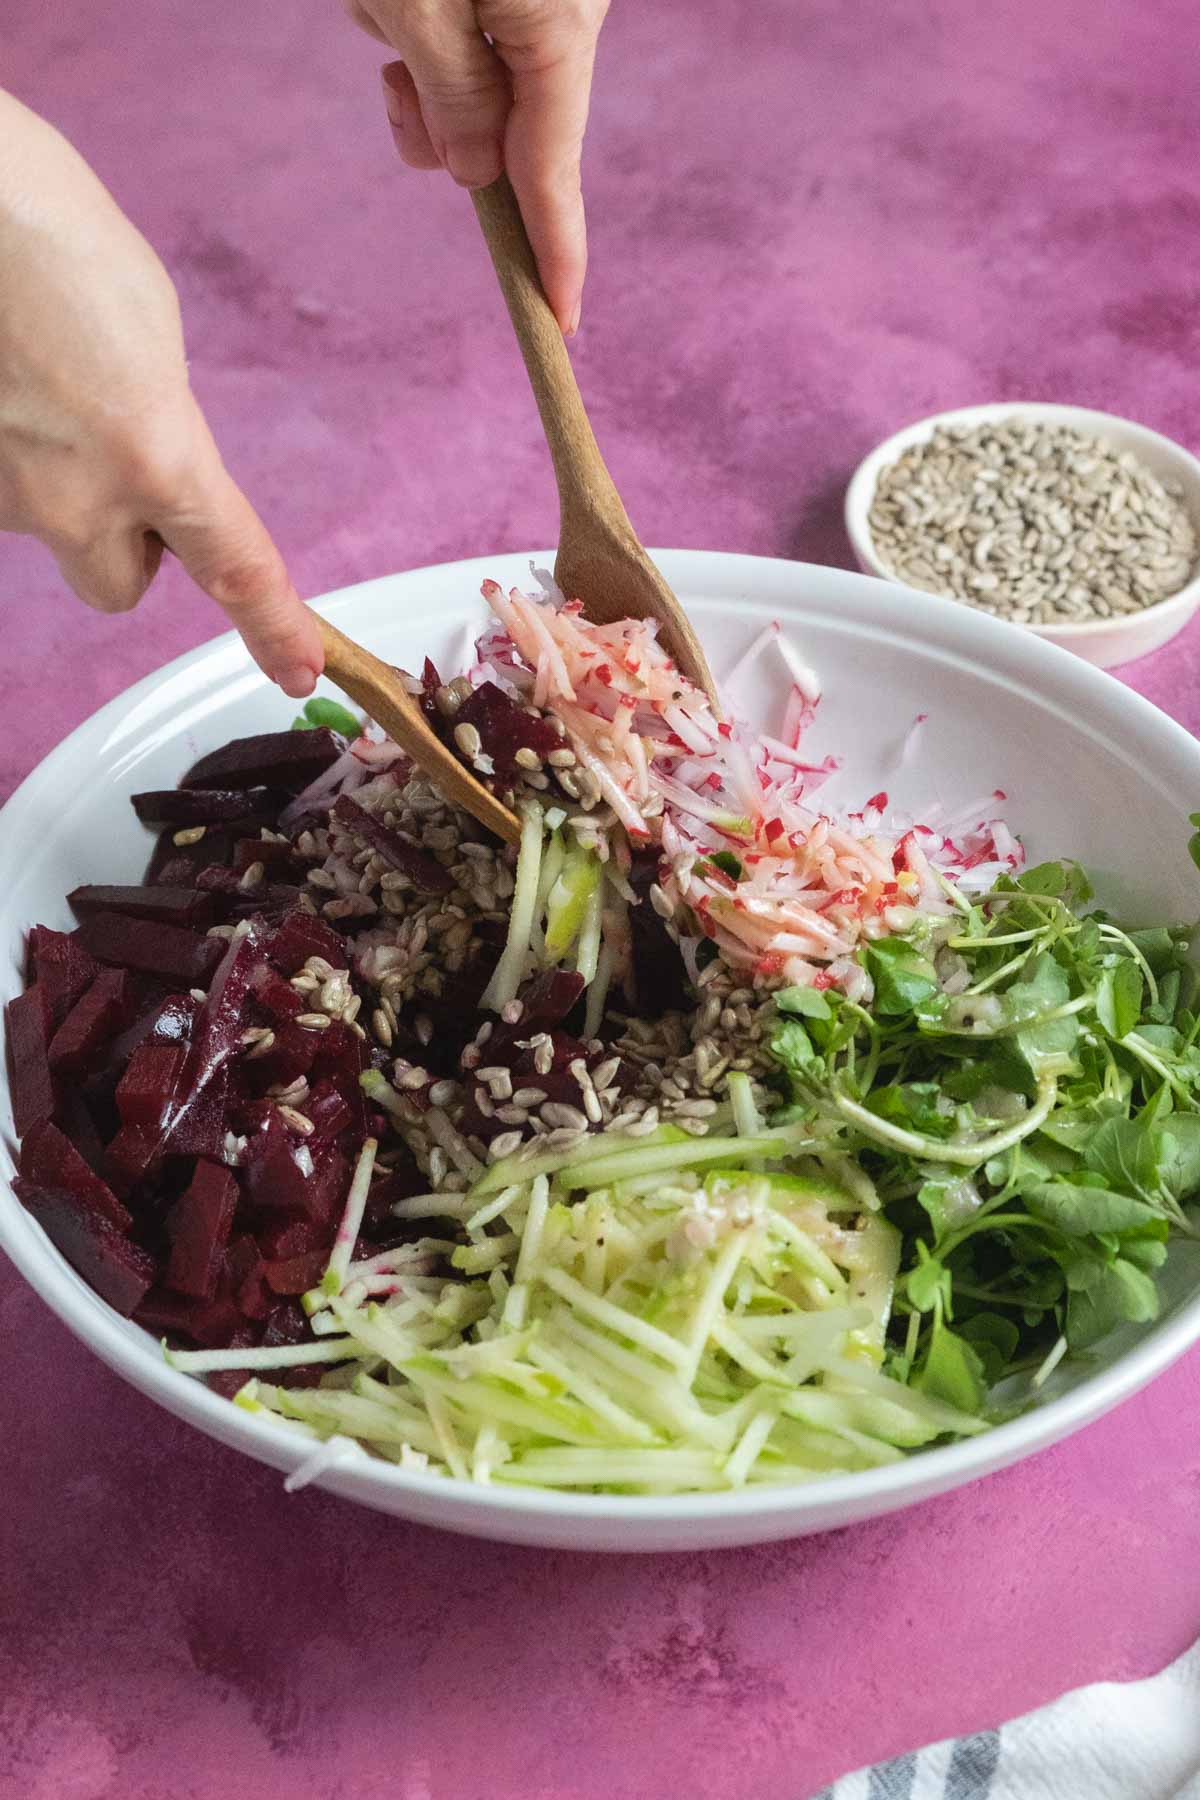 Person using tongs to mix salad ingredients.